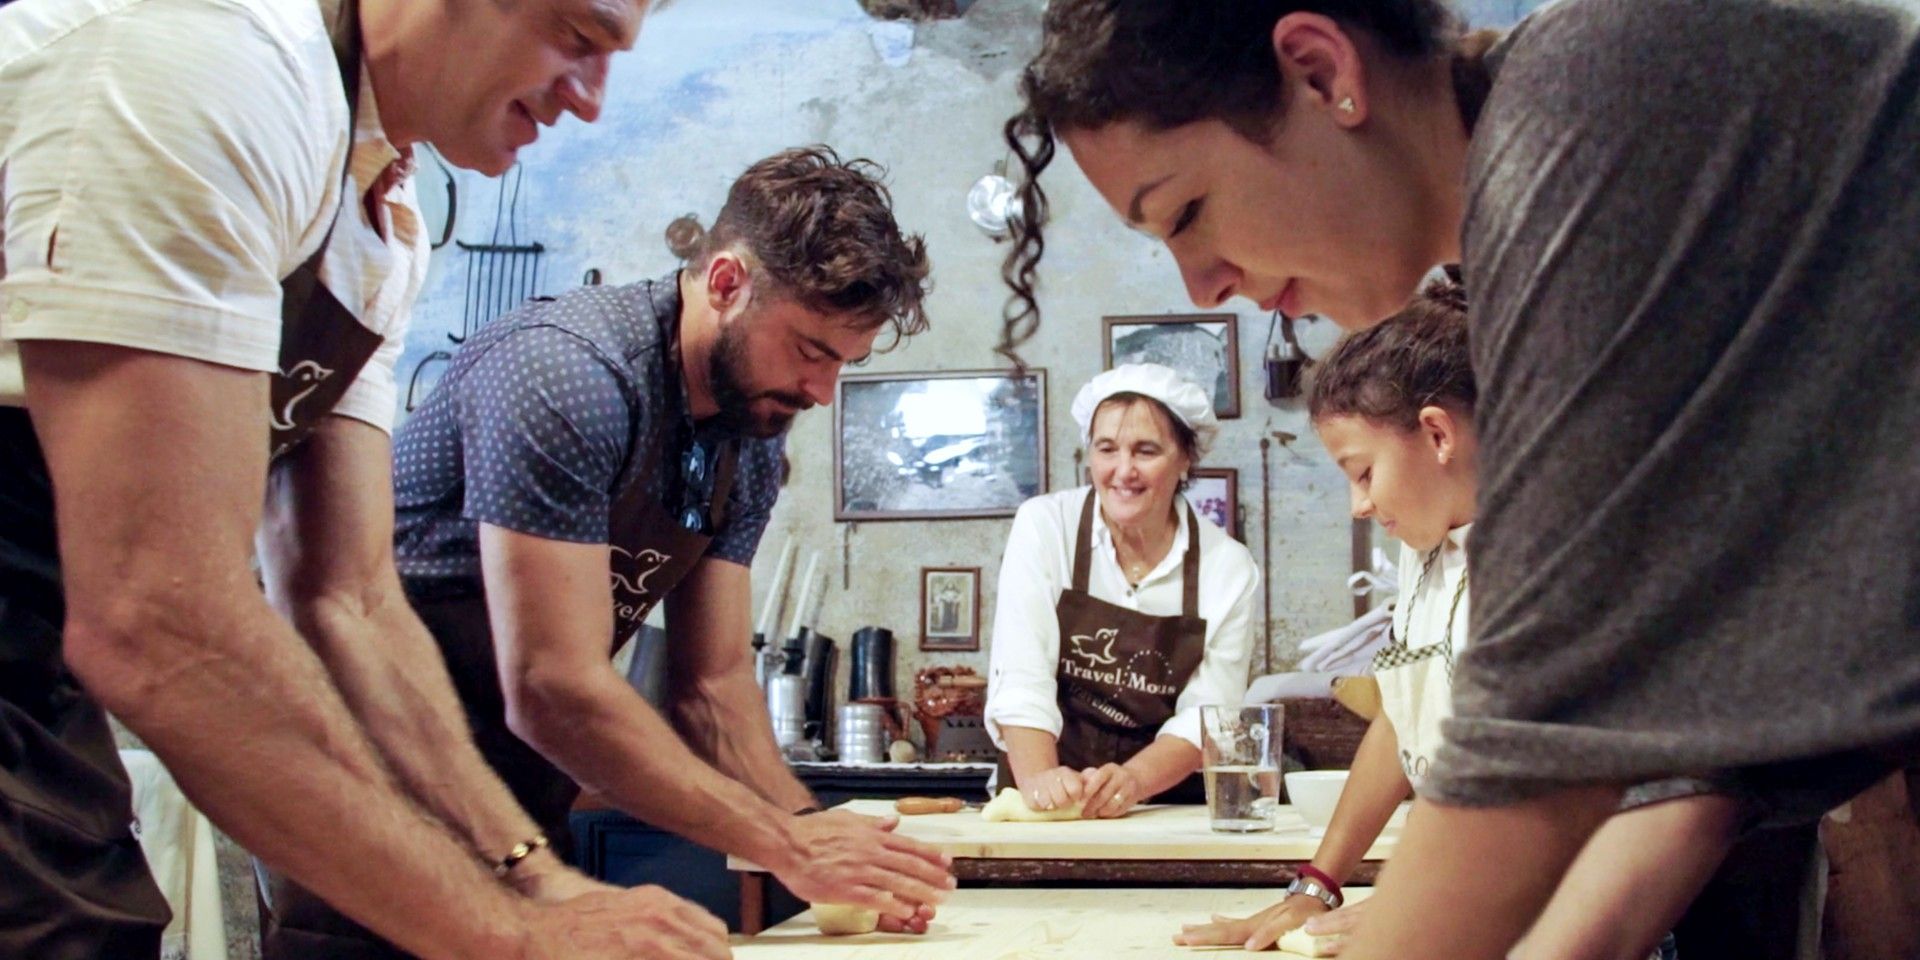 Zac Efron works with chefs on Down To Earth